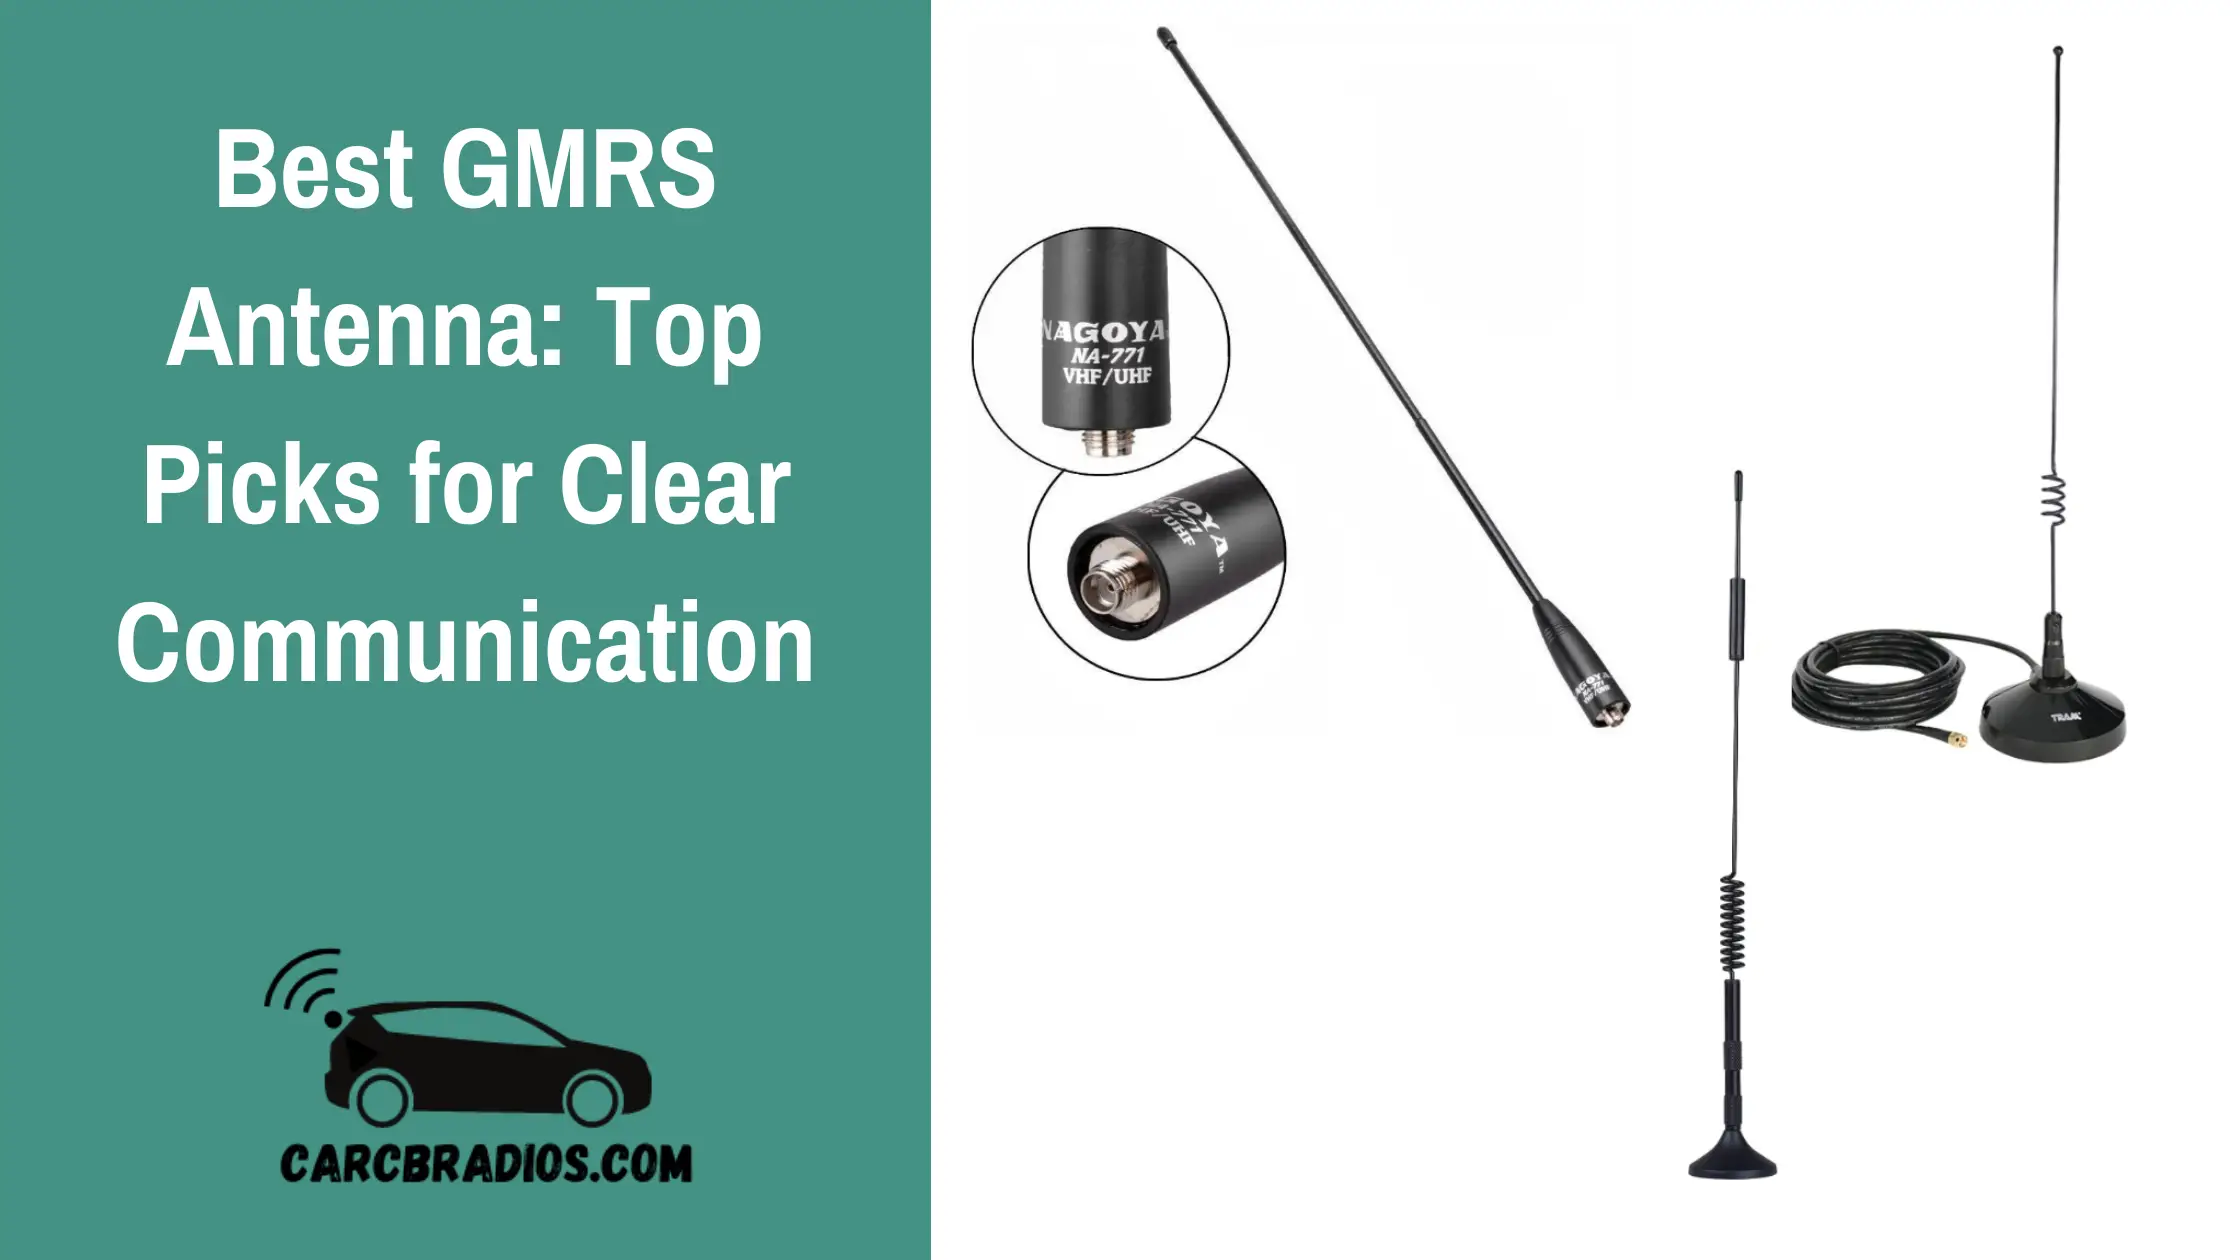 In this article, I will guide you through the process of understanding GMRS antennas and help you find the top-rated options on the market. I'll also cover the various factors to consider when choosing an antenna, as well as the different types of antennas available. Whether you're a seasoned GMRS user or just starting out, this article will provide you with the knowledge you need to make an informed decision when it comes to selecting the best GMRS antenna for your needs.